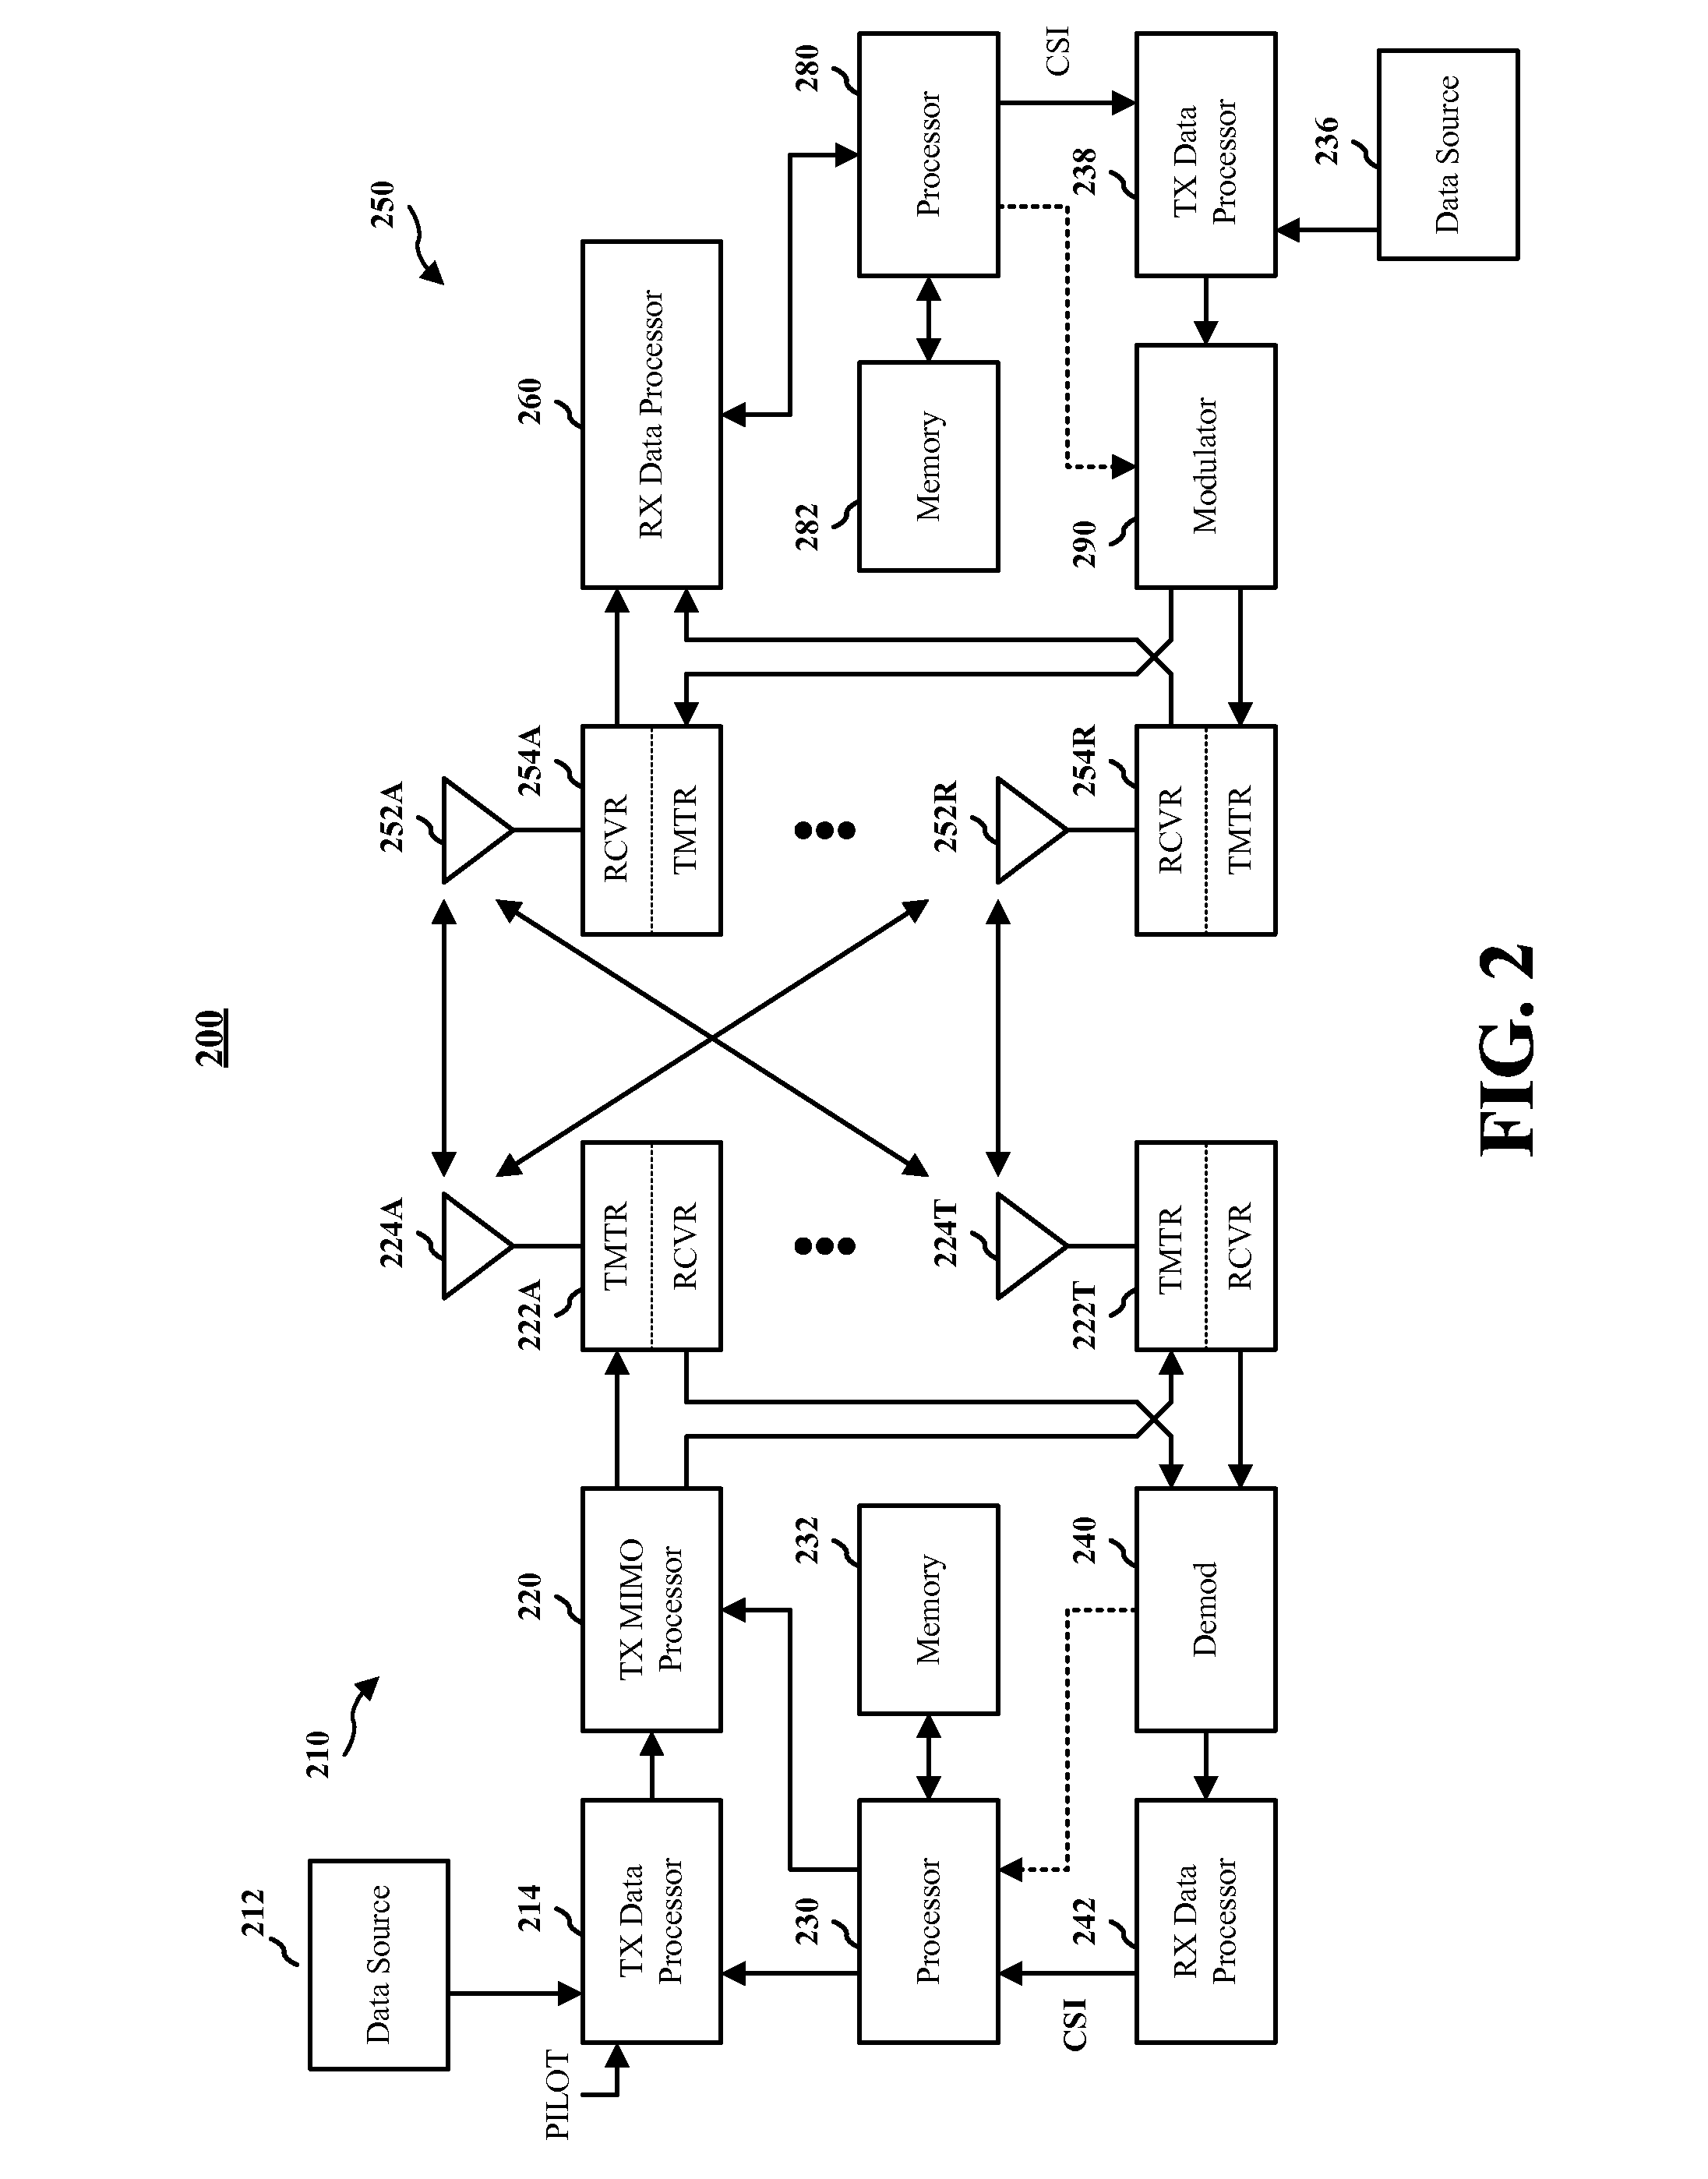 Apparatus and method for transmit-response timing for relay operation in wireless communications